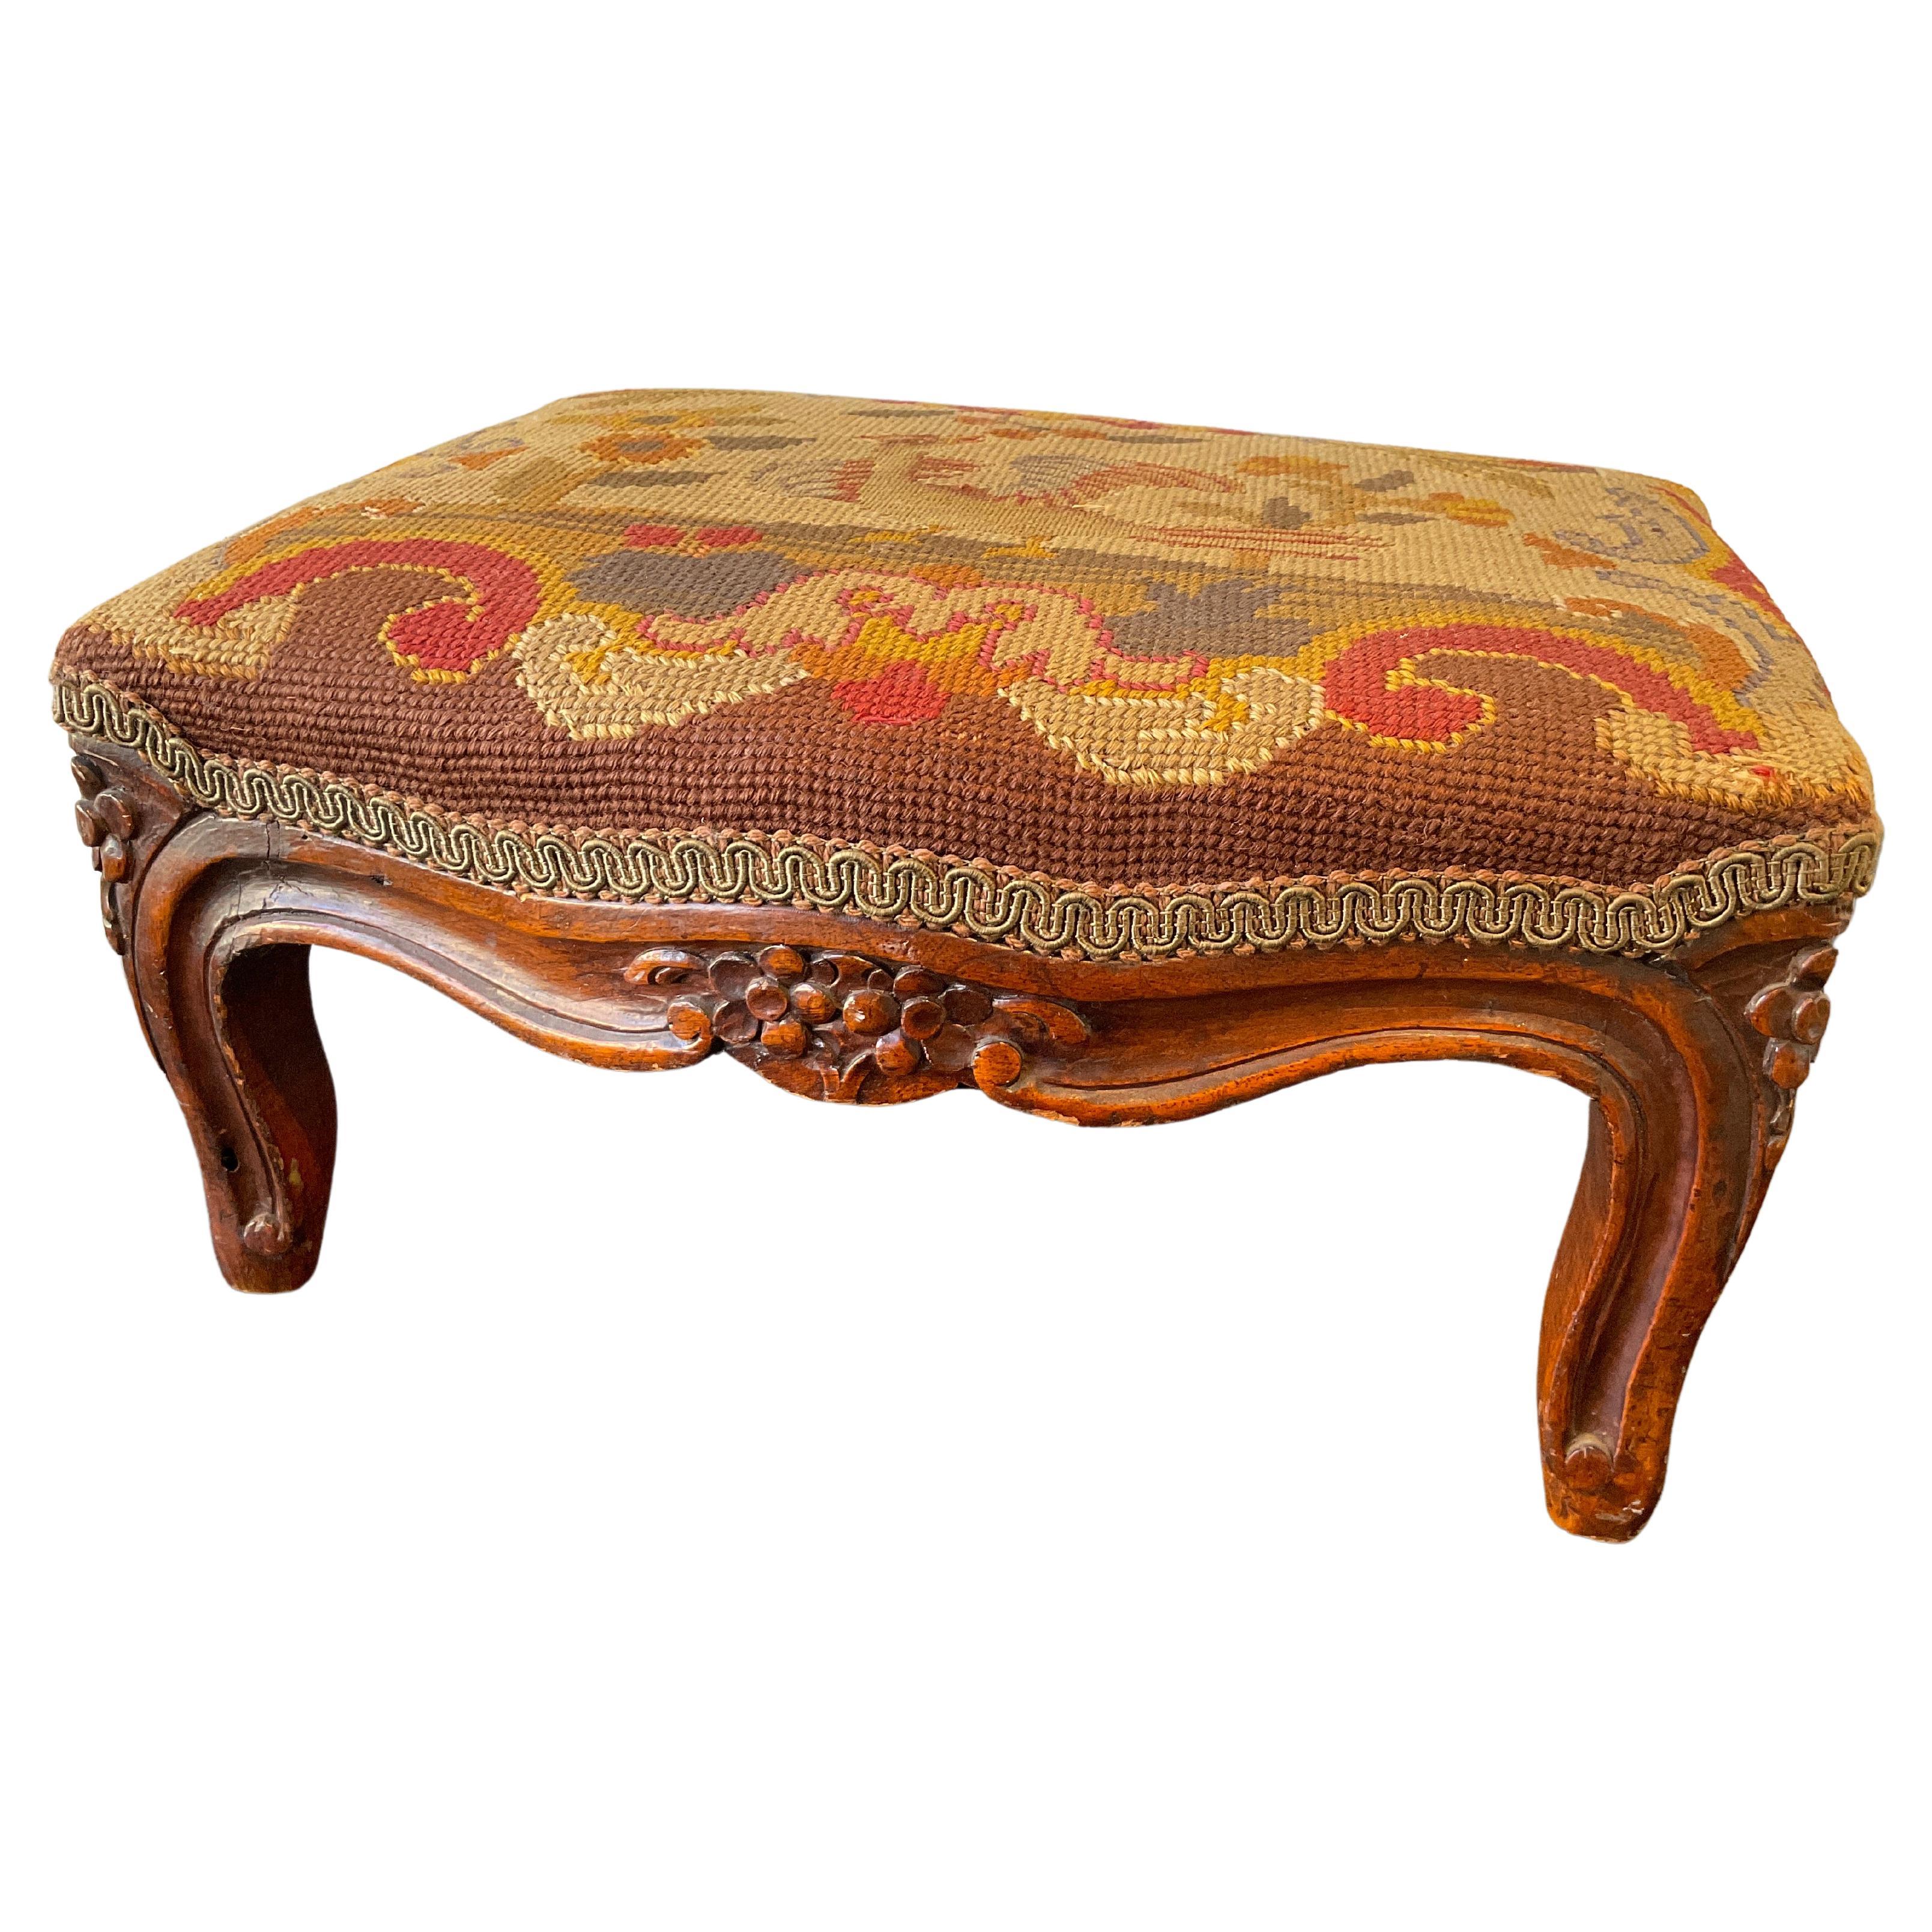 1910 French Hand Carved Wood Footstool with Needlepoint Top For Sale